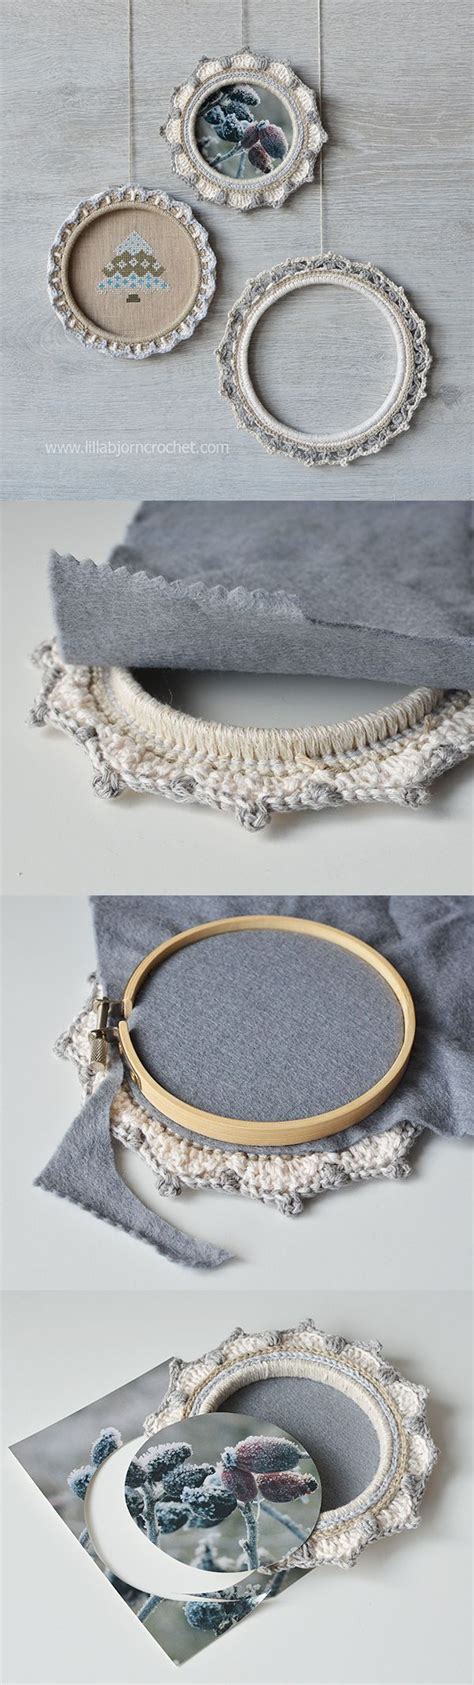 How To Very Easily Turn Embroidery Hoops With Crochet Border Into